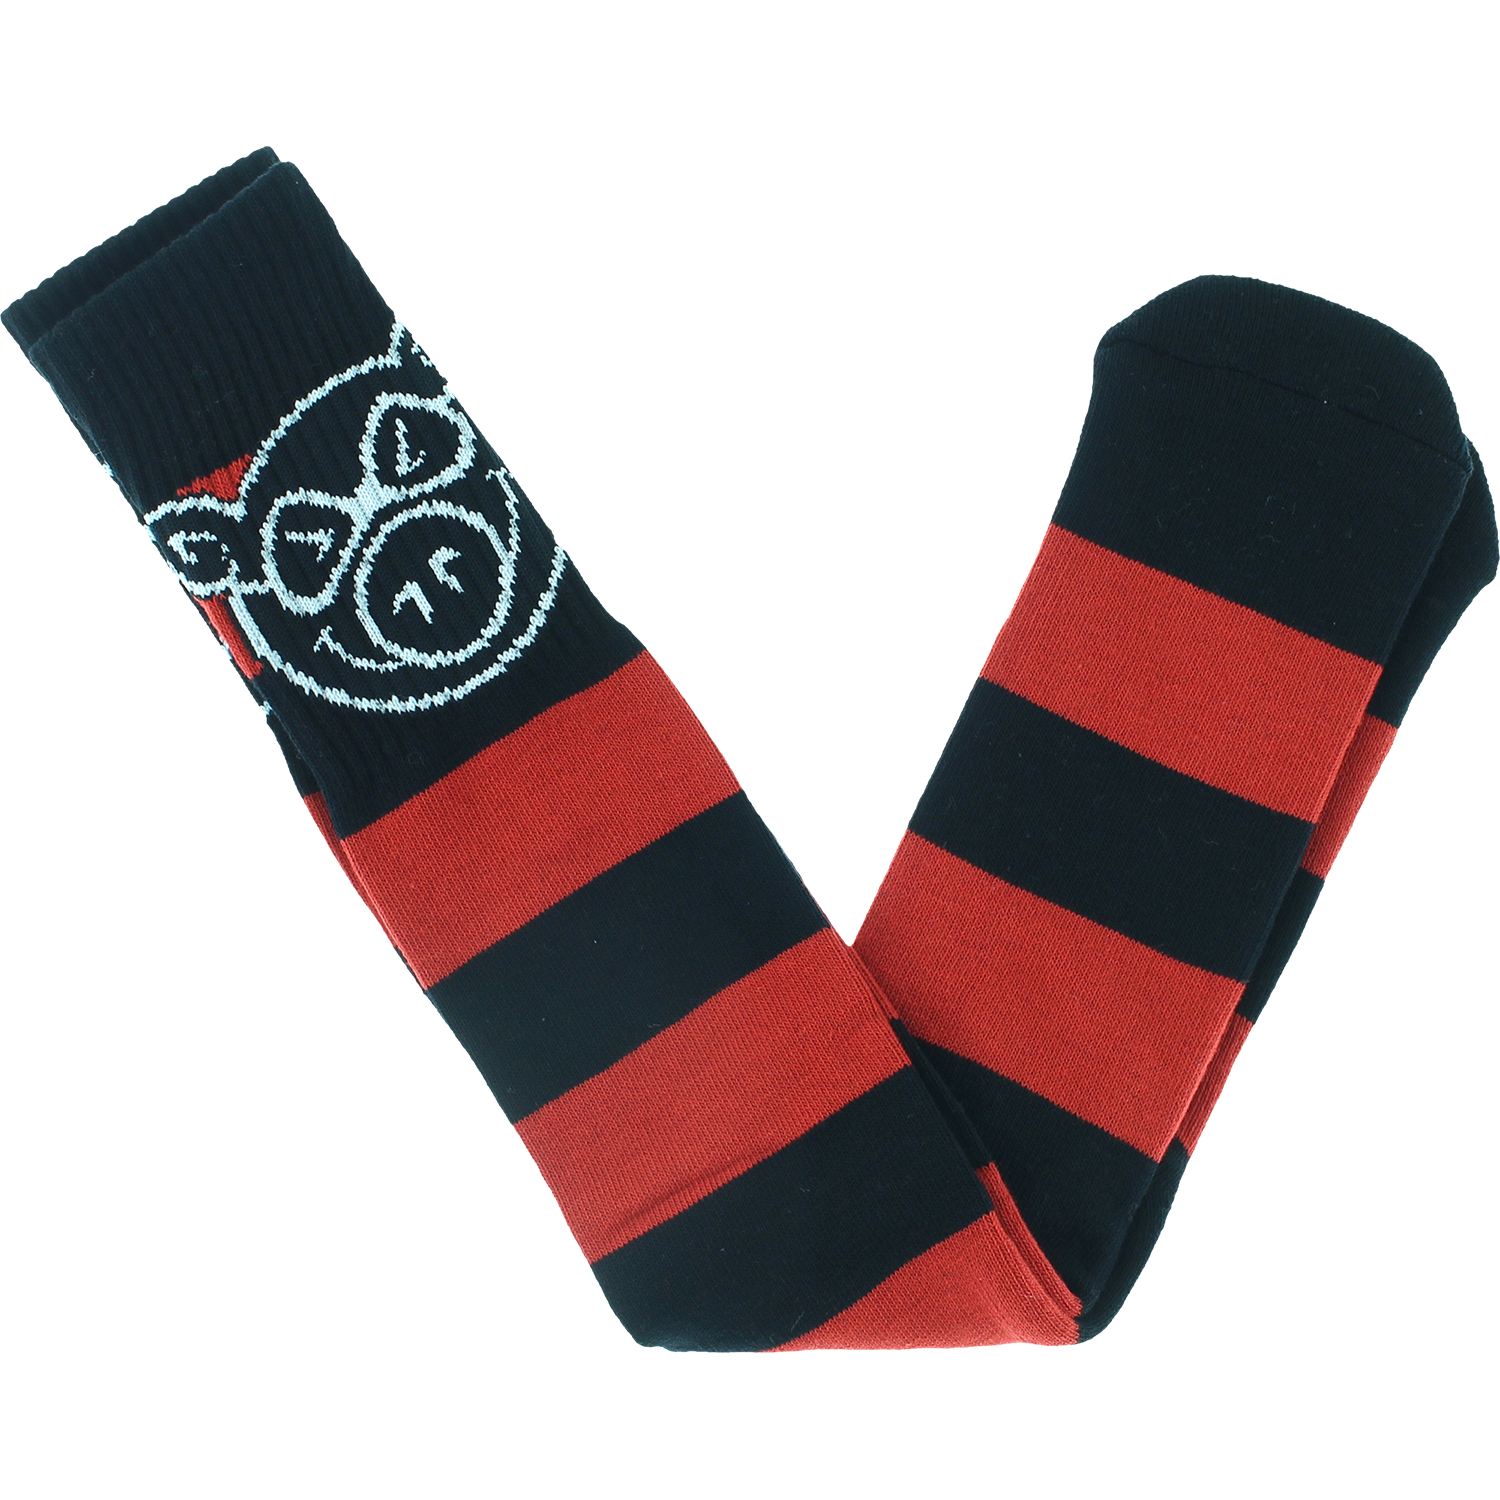 Pig Head Stripe Tall Socks Black and Red - Invisible Board Shop